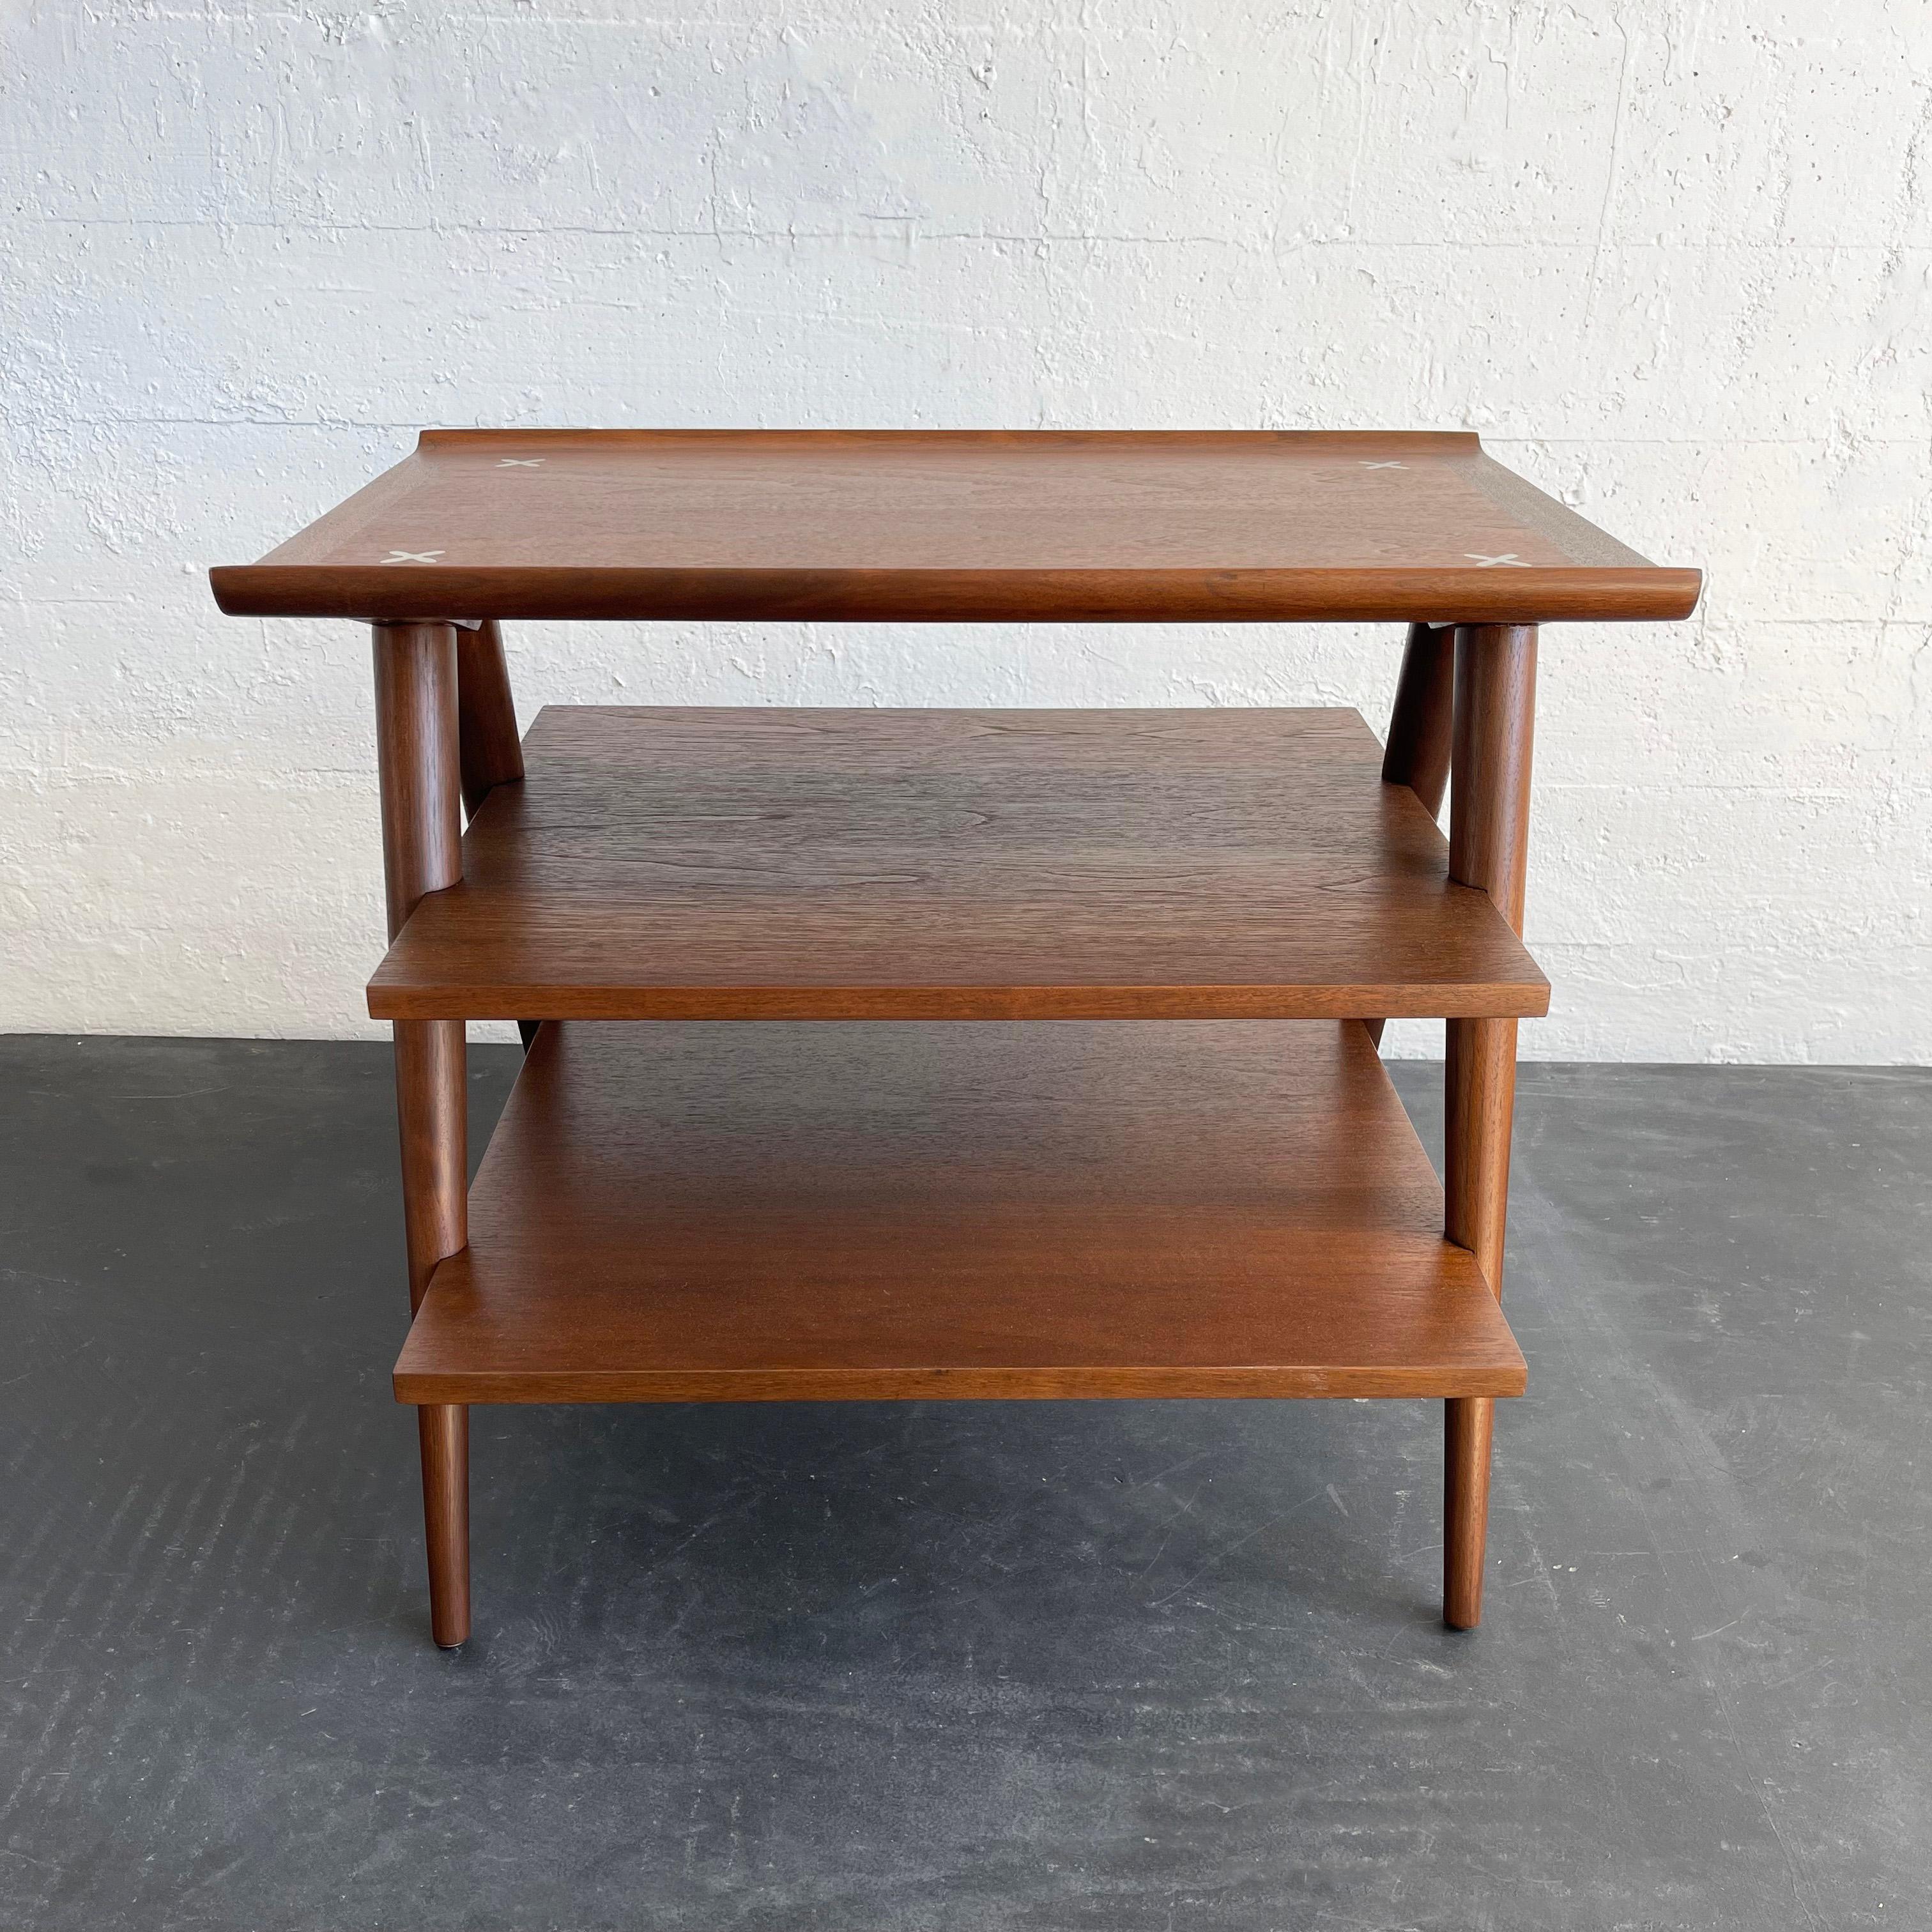 Inlay Mid Century Modern Tiered Side Table By Merton Gershun, American Of Martinsville For Sale